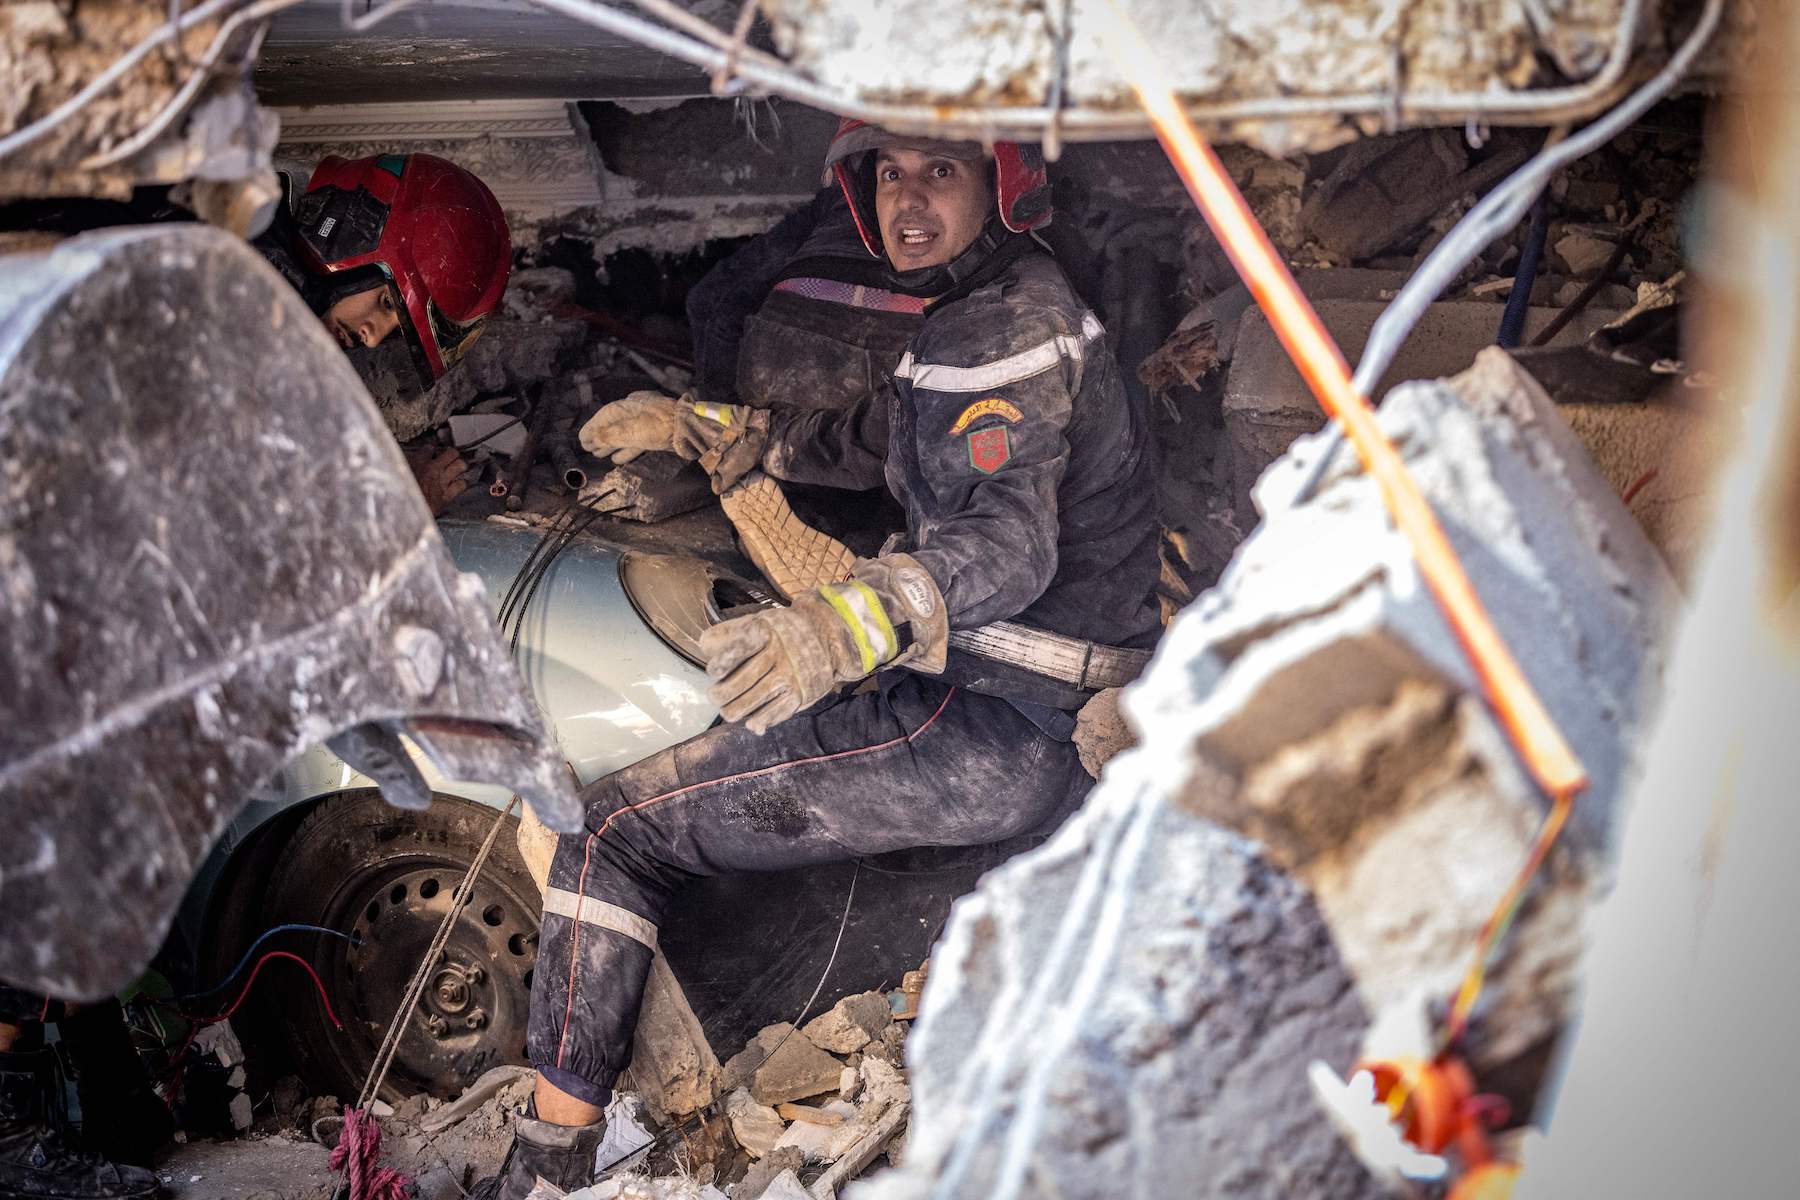 Rescue workers search for survivors after earthquake